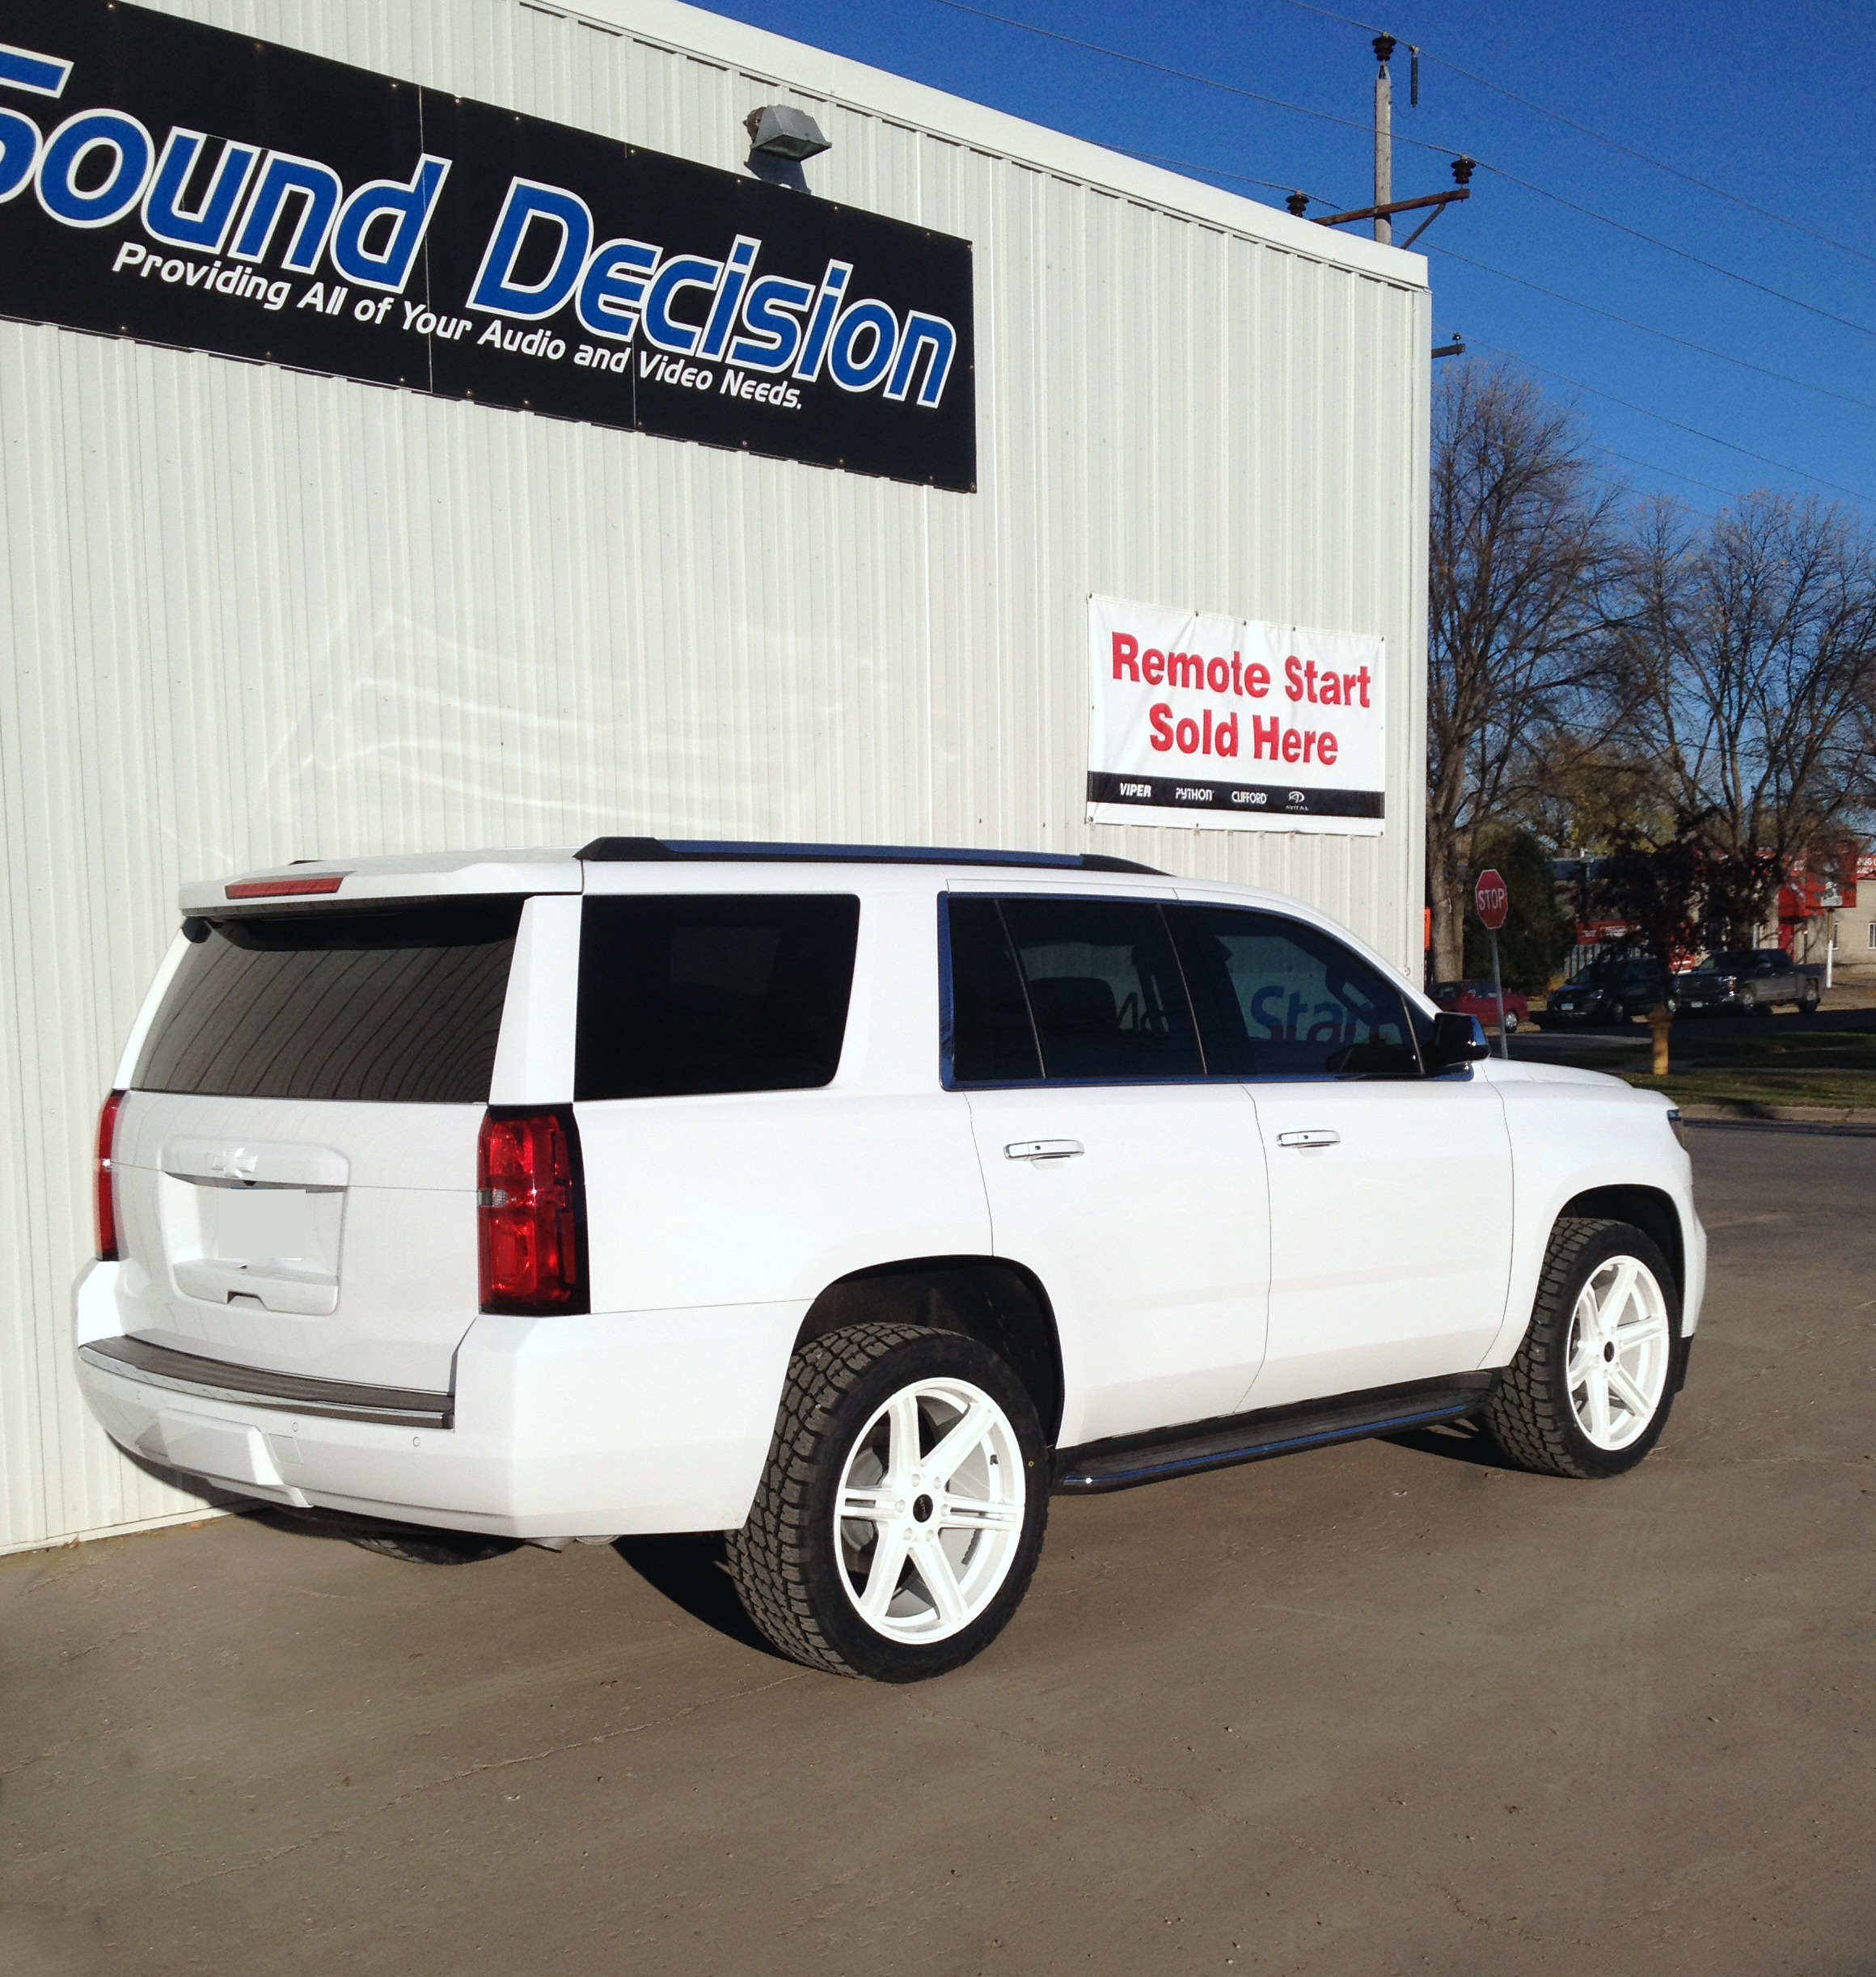 2015 Chevy Tahoe Custom Powder Coated KMC Wheels, Stripped Emblems, Painted Bowties to Match